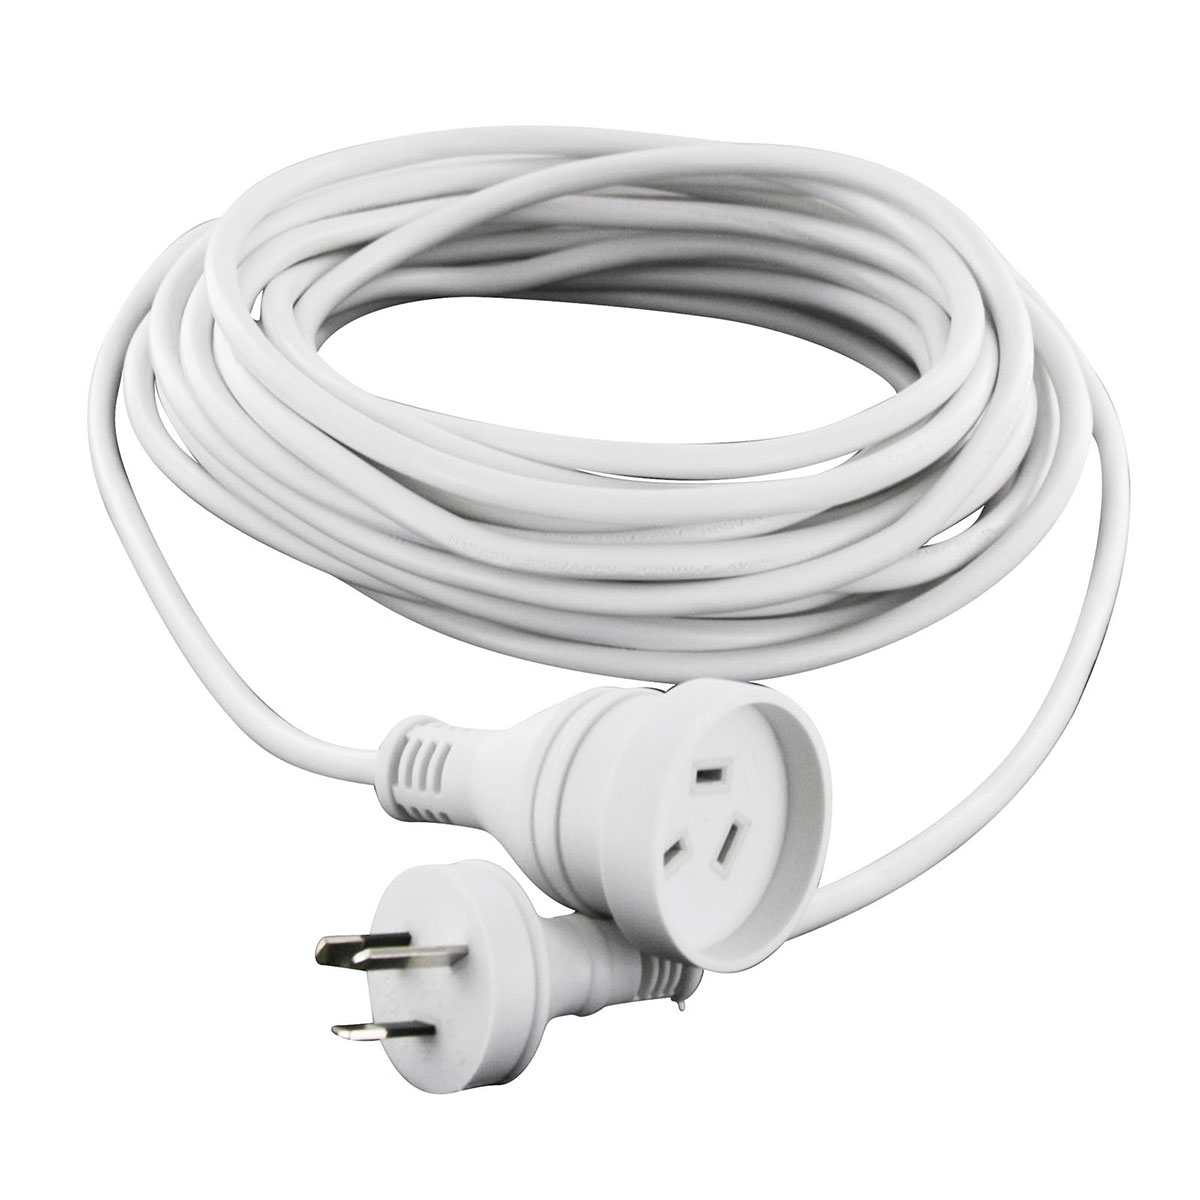 Leica Leitz COOKT 15543 5' Extension Cord Cable for CEYOO Flash Leica #Q76 